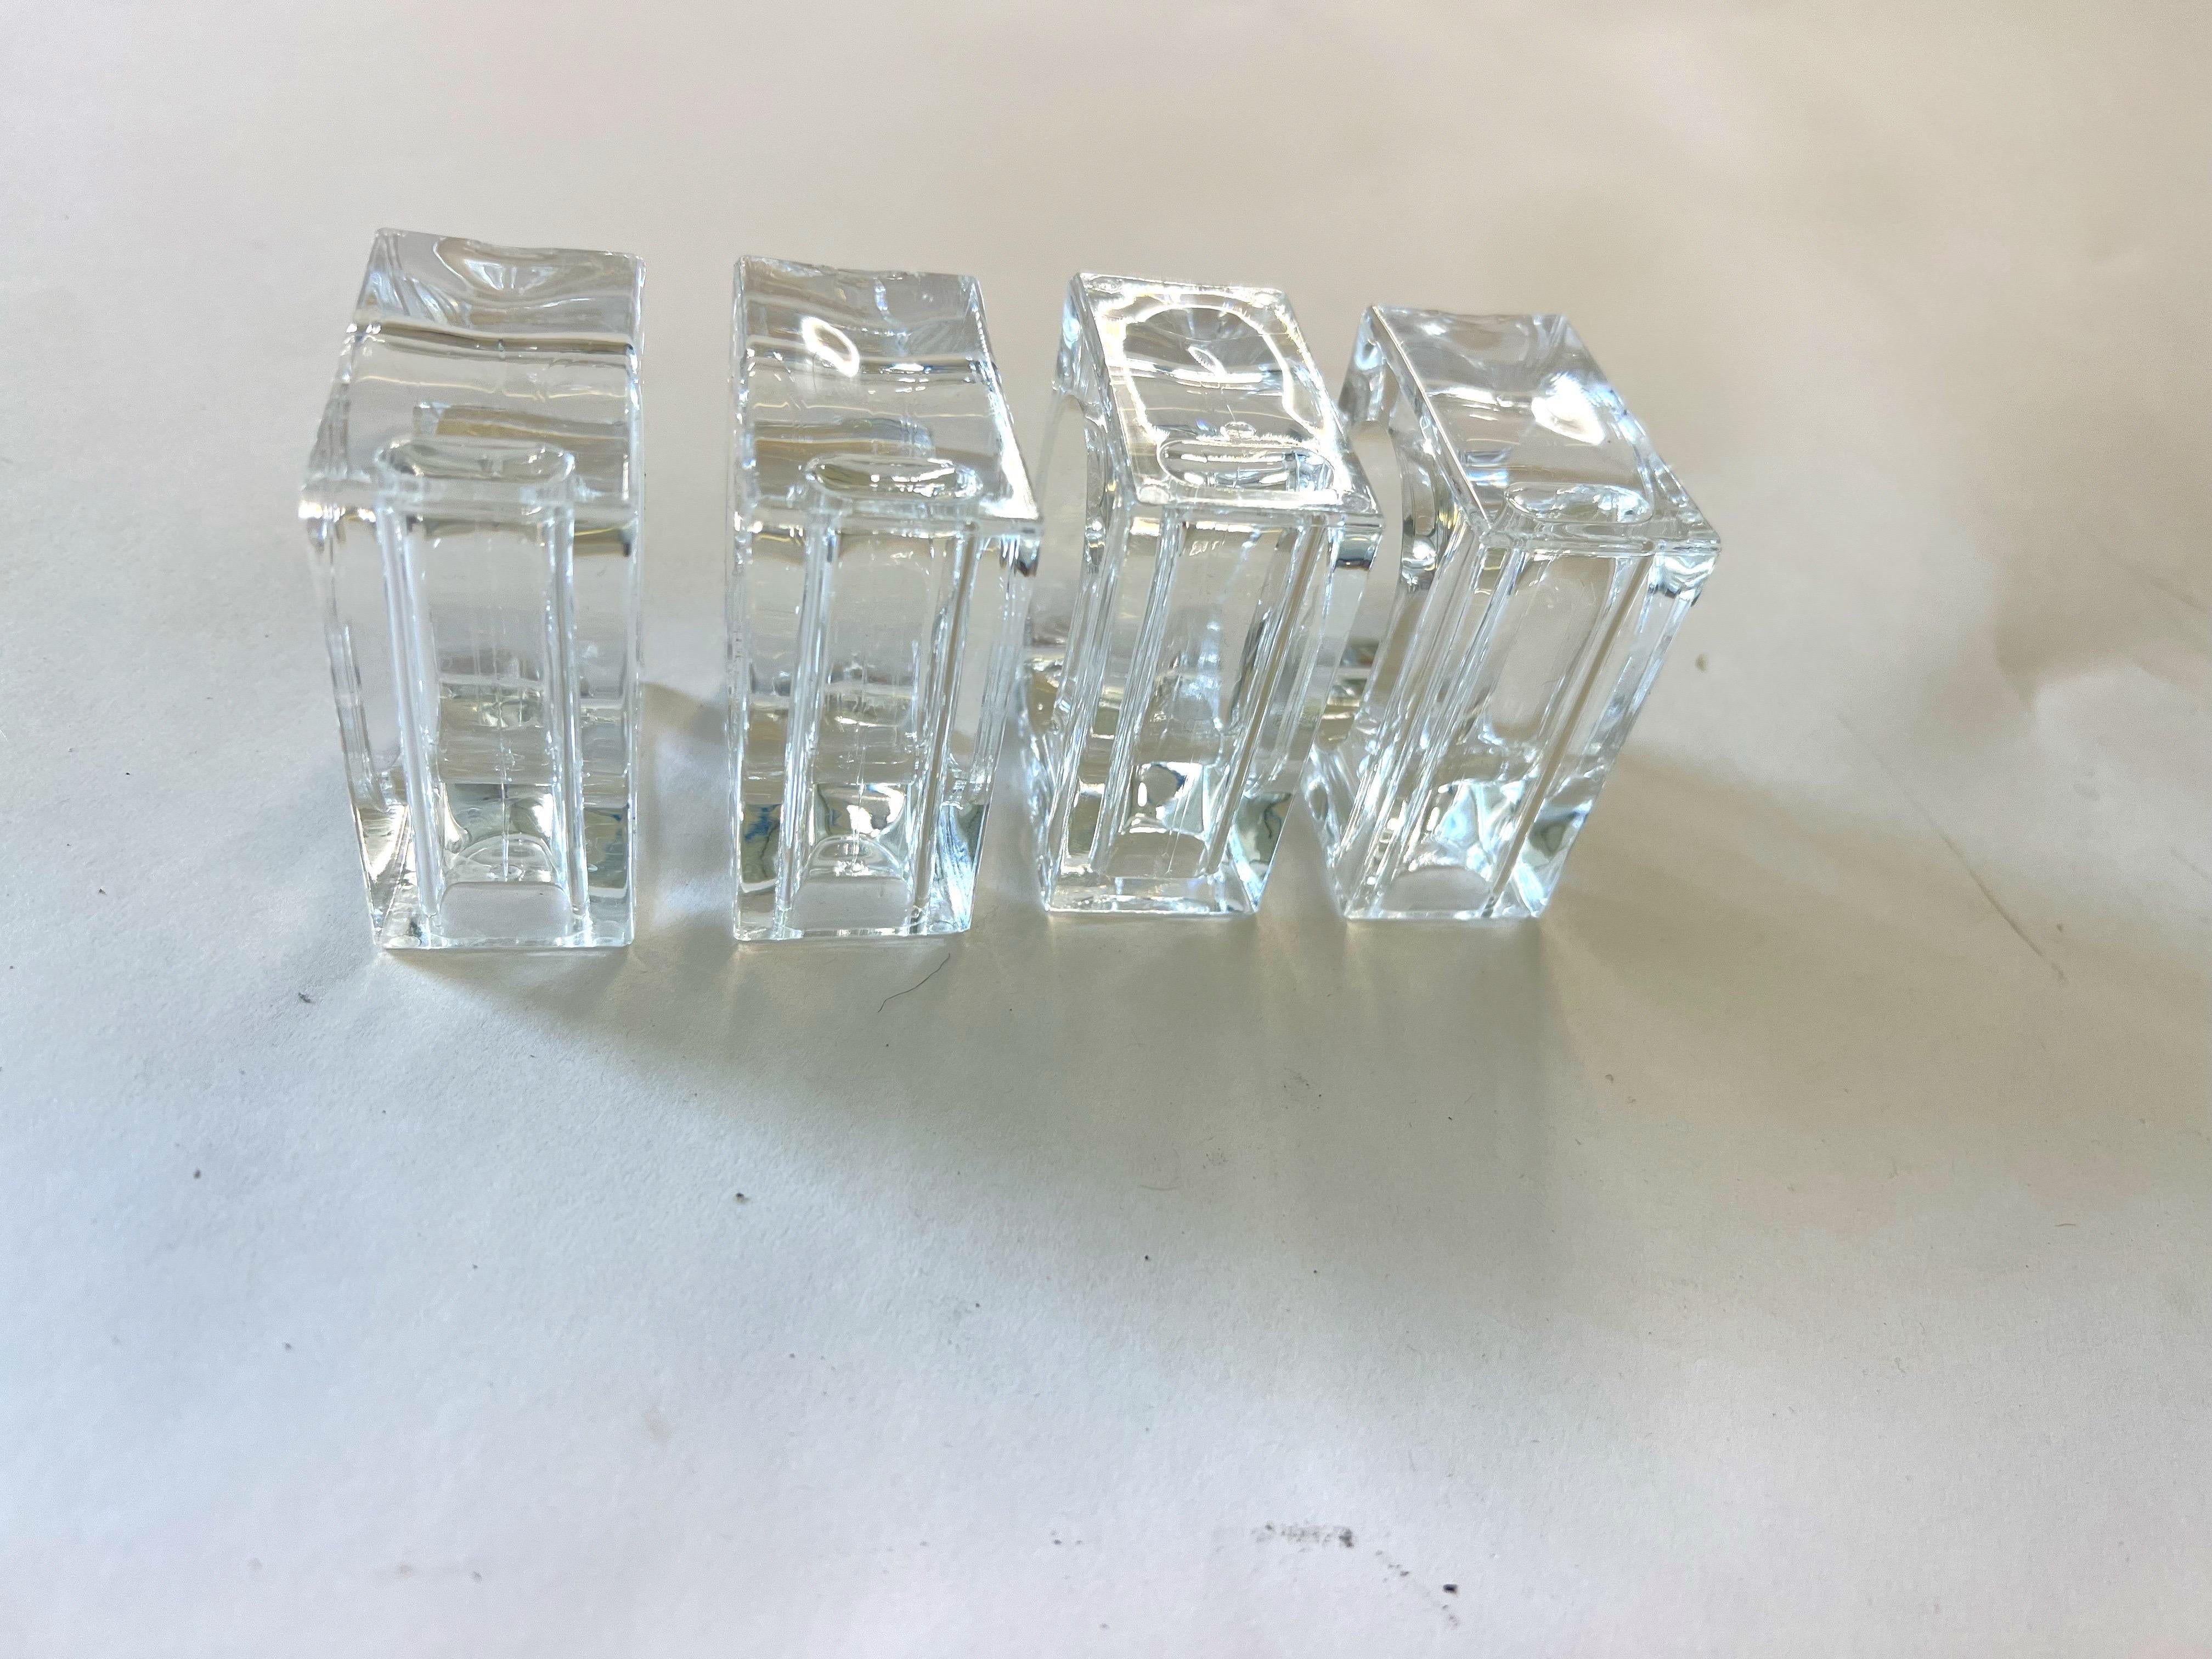 American Set of 4 Midcentury Polished Lucite Napkin Rings Holders, Usa, Circa 1960s For Sale